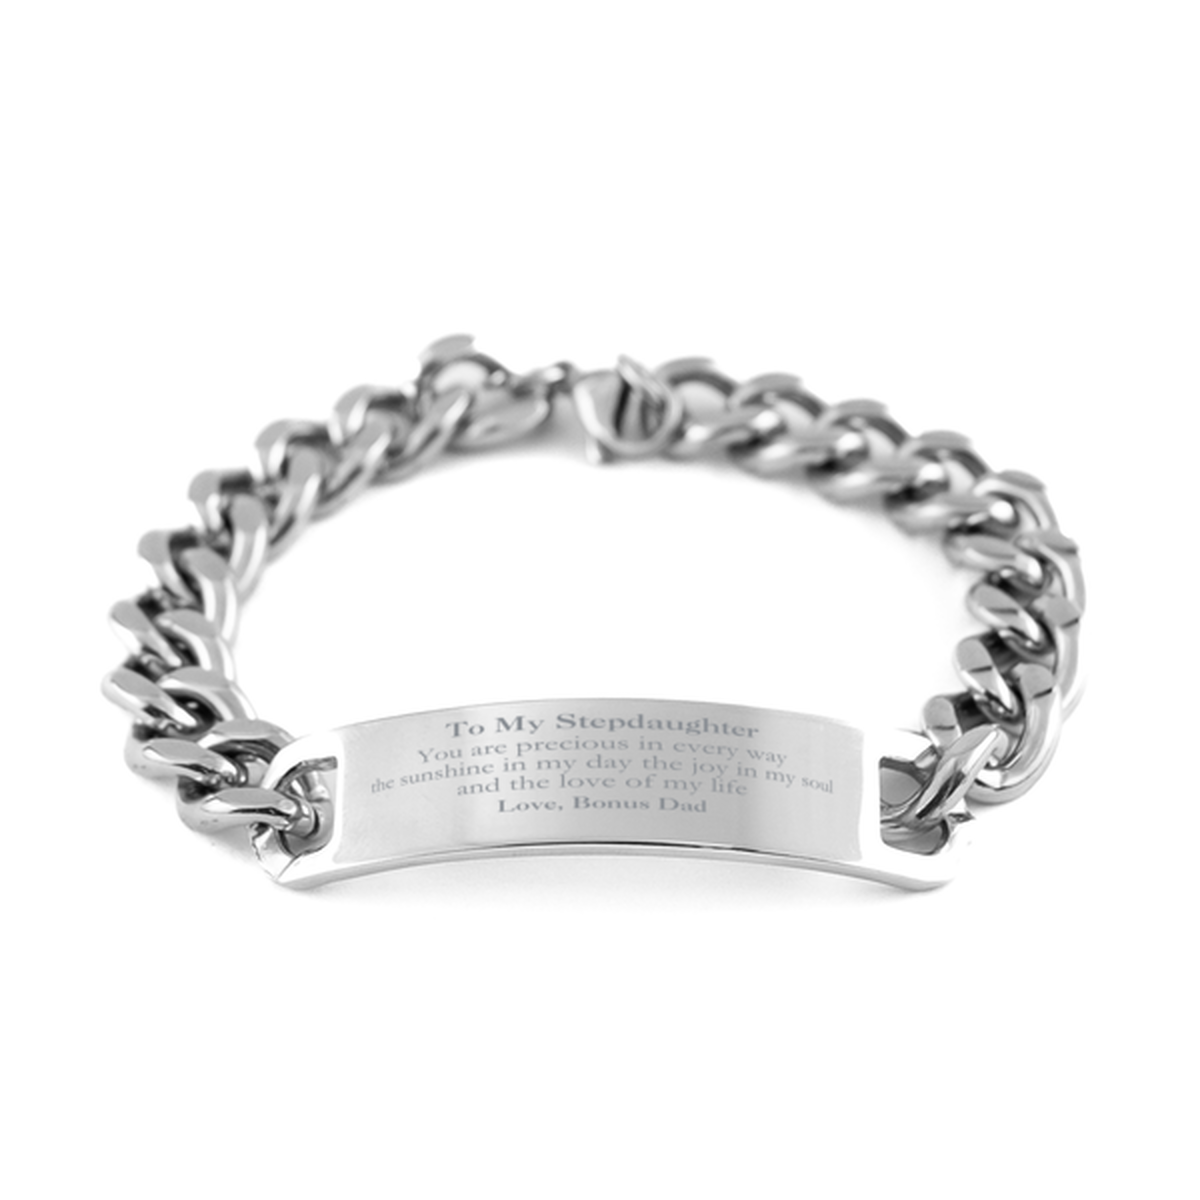 Graduation Gifts for Stepdaughter Cuban Chain Stainless Steel Bracelet Present from Bonus Dad, Christmas Stepdaughter Birthday Gifts Stepdaughter You are precious in every way the sunshine in my day. Love, Bonus Dad